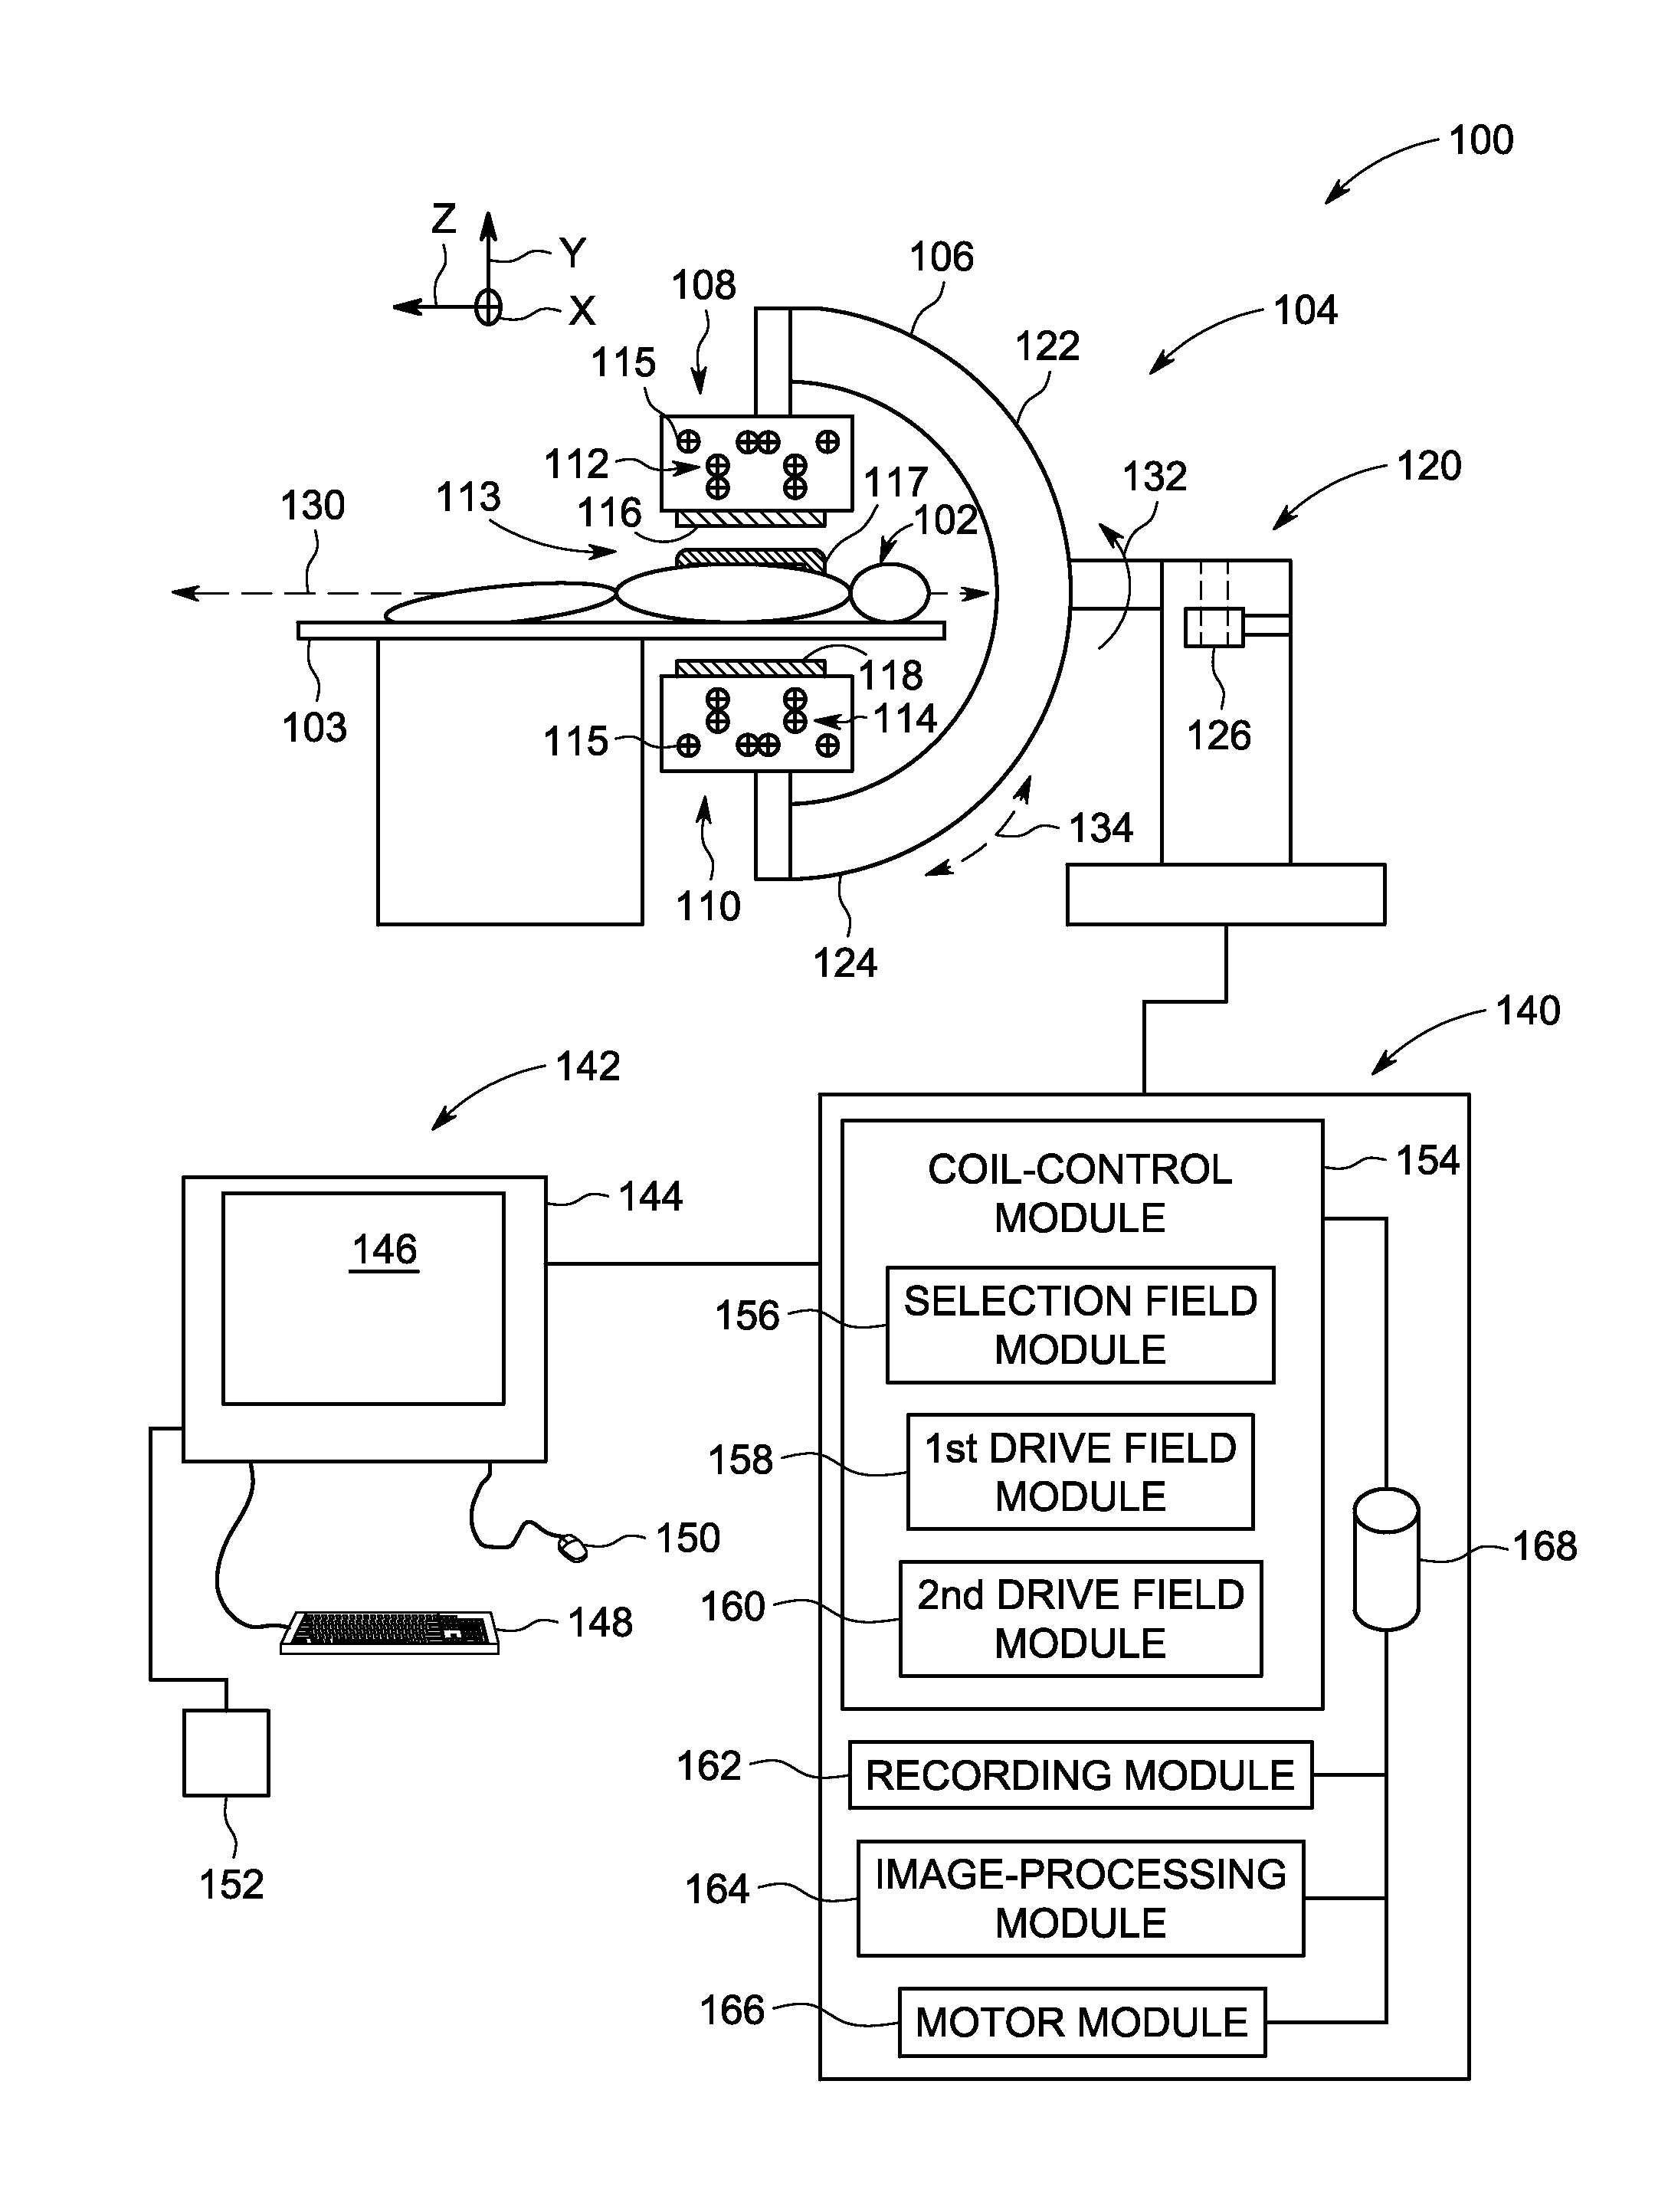 Systems and methods for magnetic material imaging